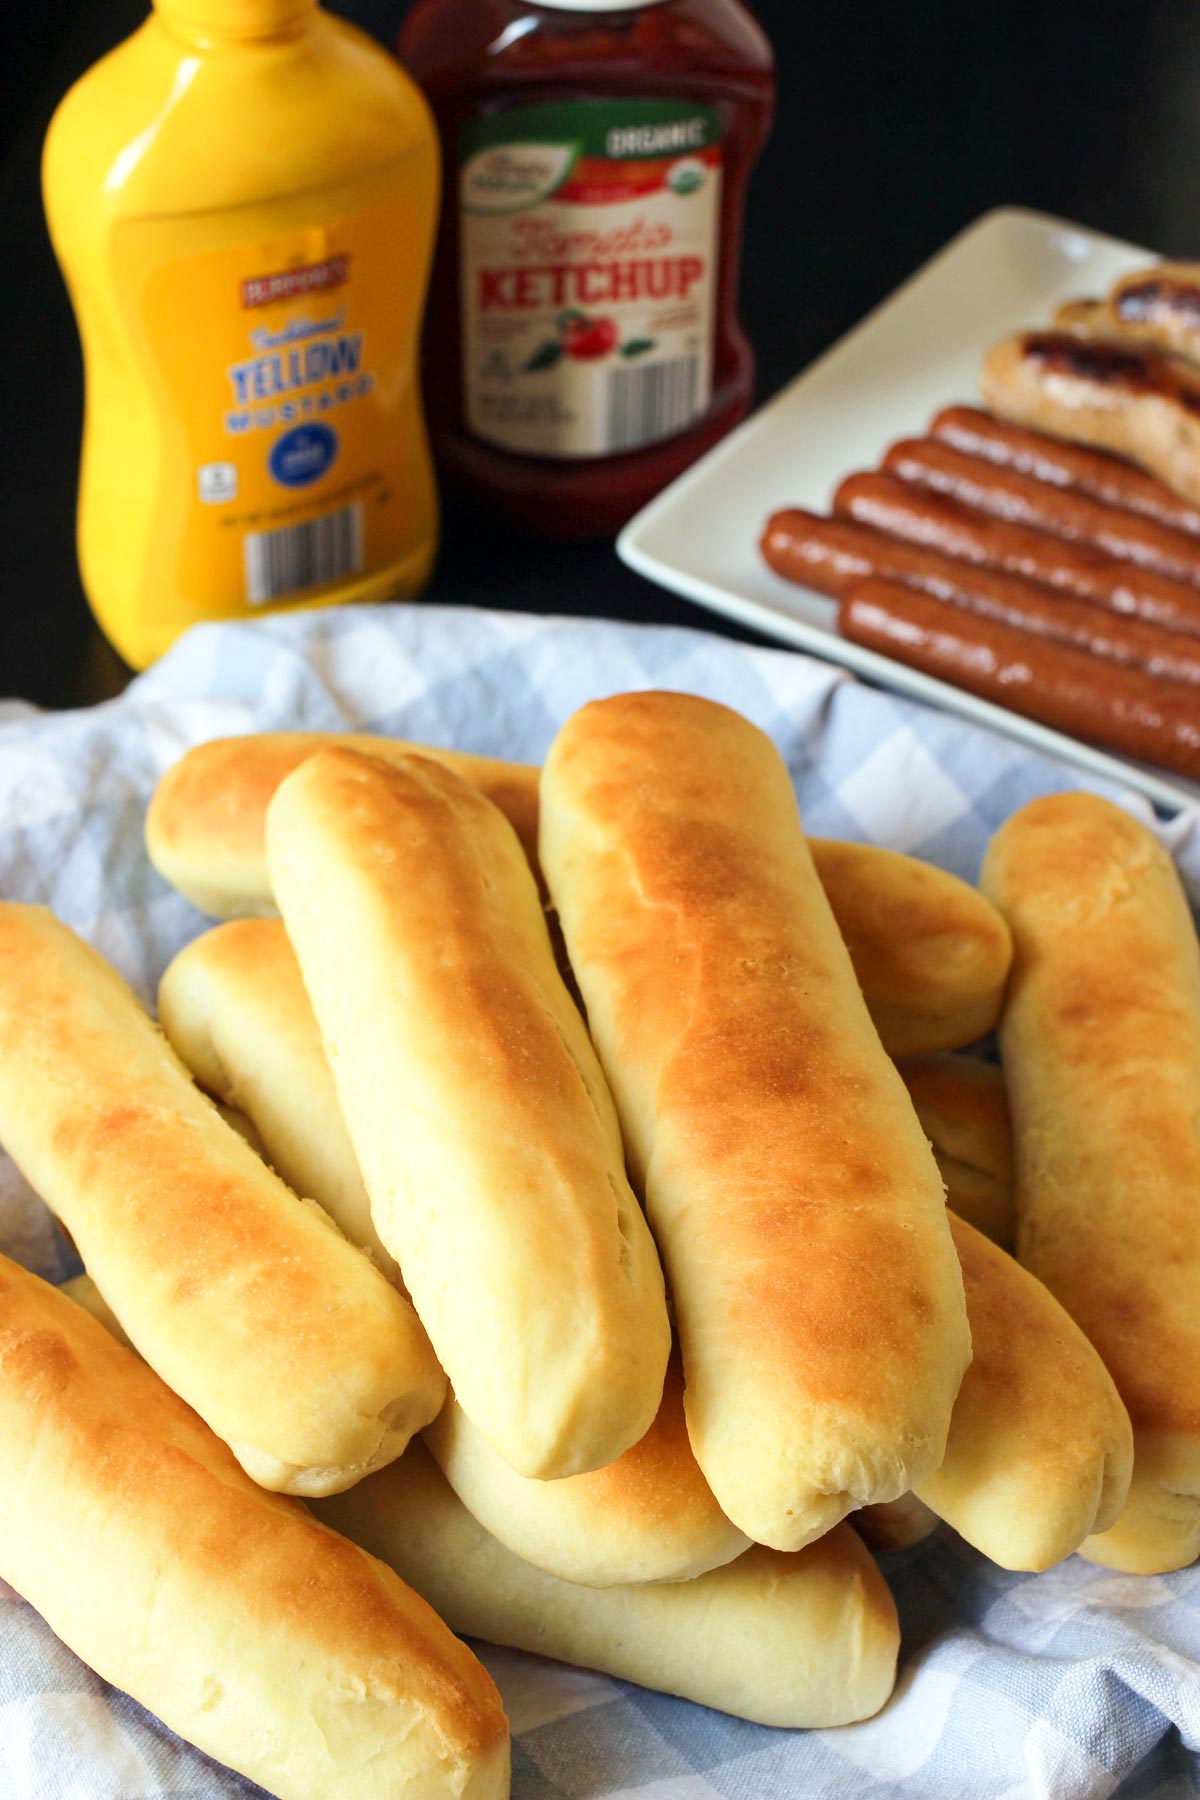 basket of homemade hot dog buns lined with a blue check napkin on a table set with condiments and hot dogs.